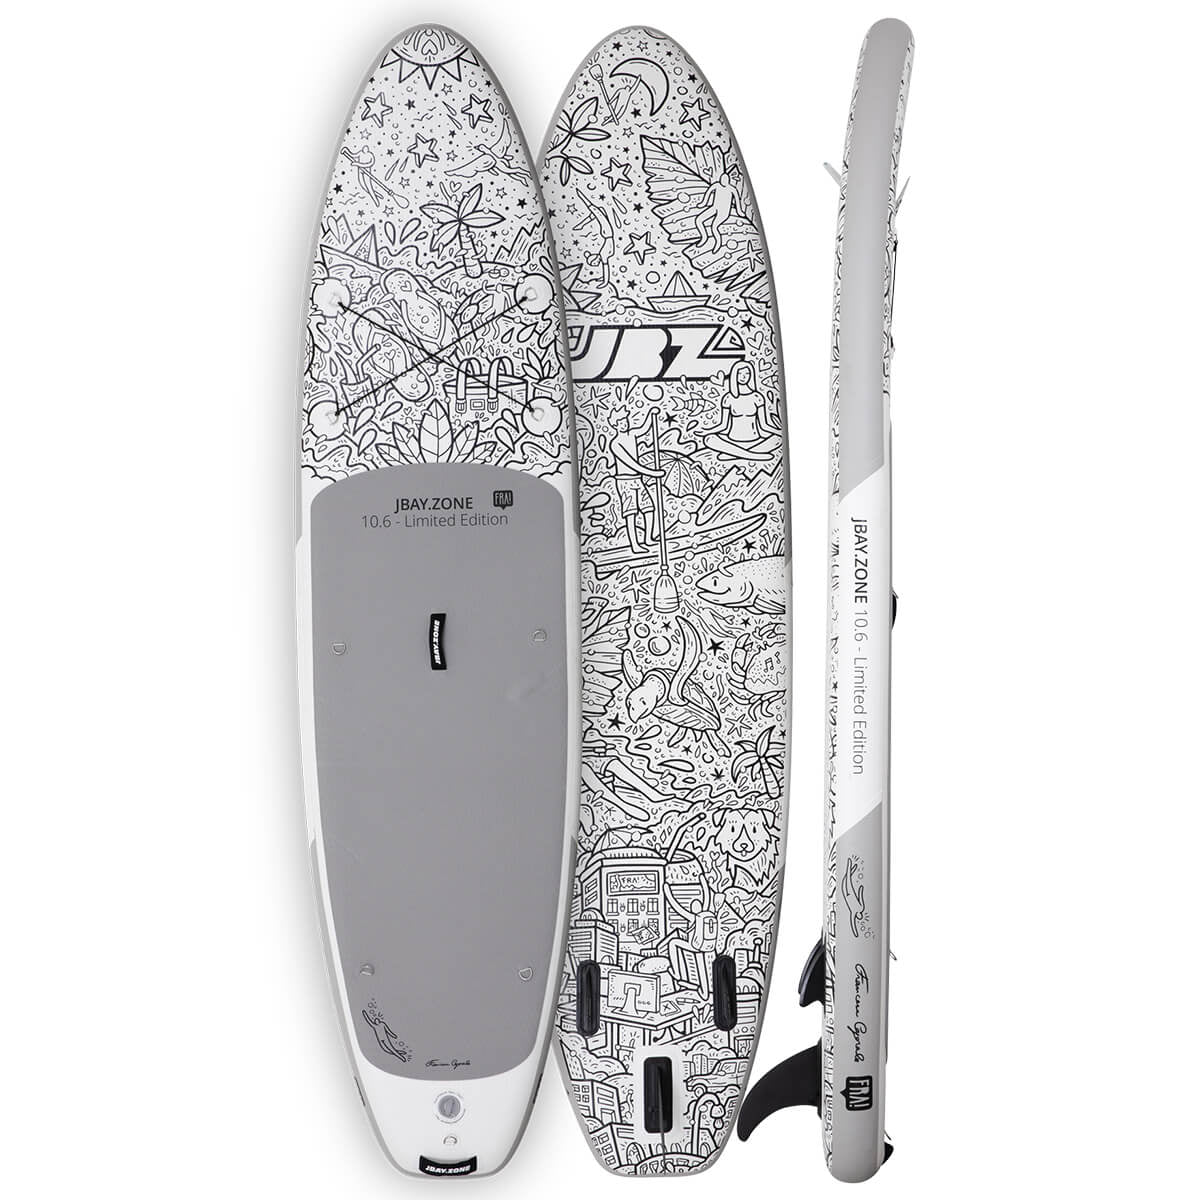 Stand Up Paddle Jbay.Zone FRA! Special Edition White